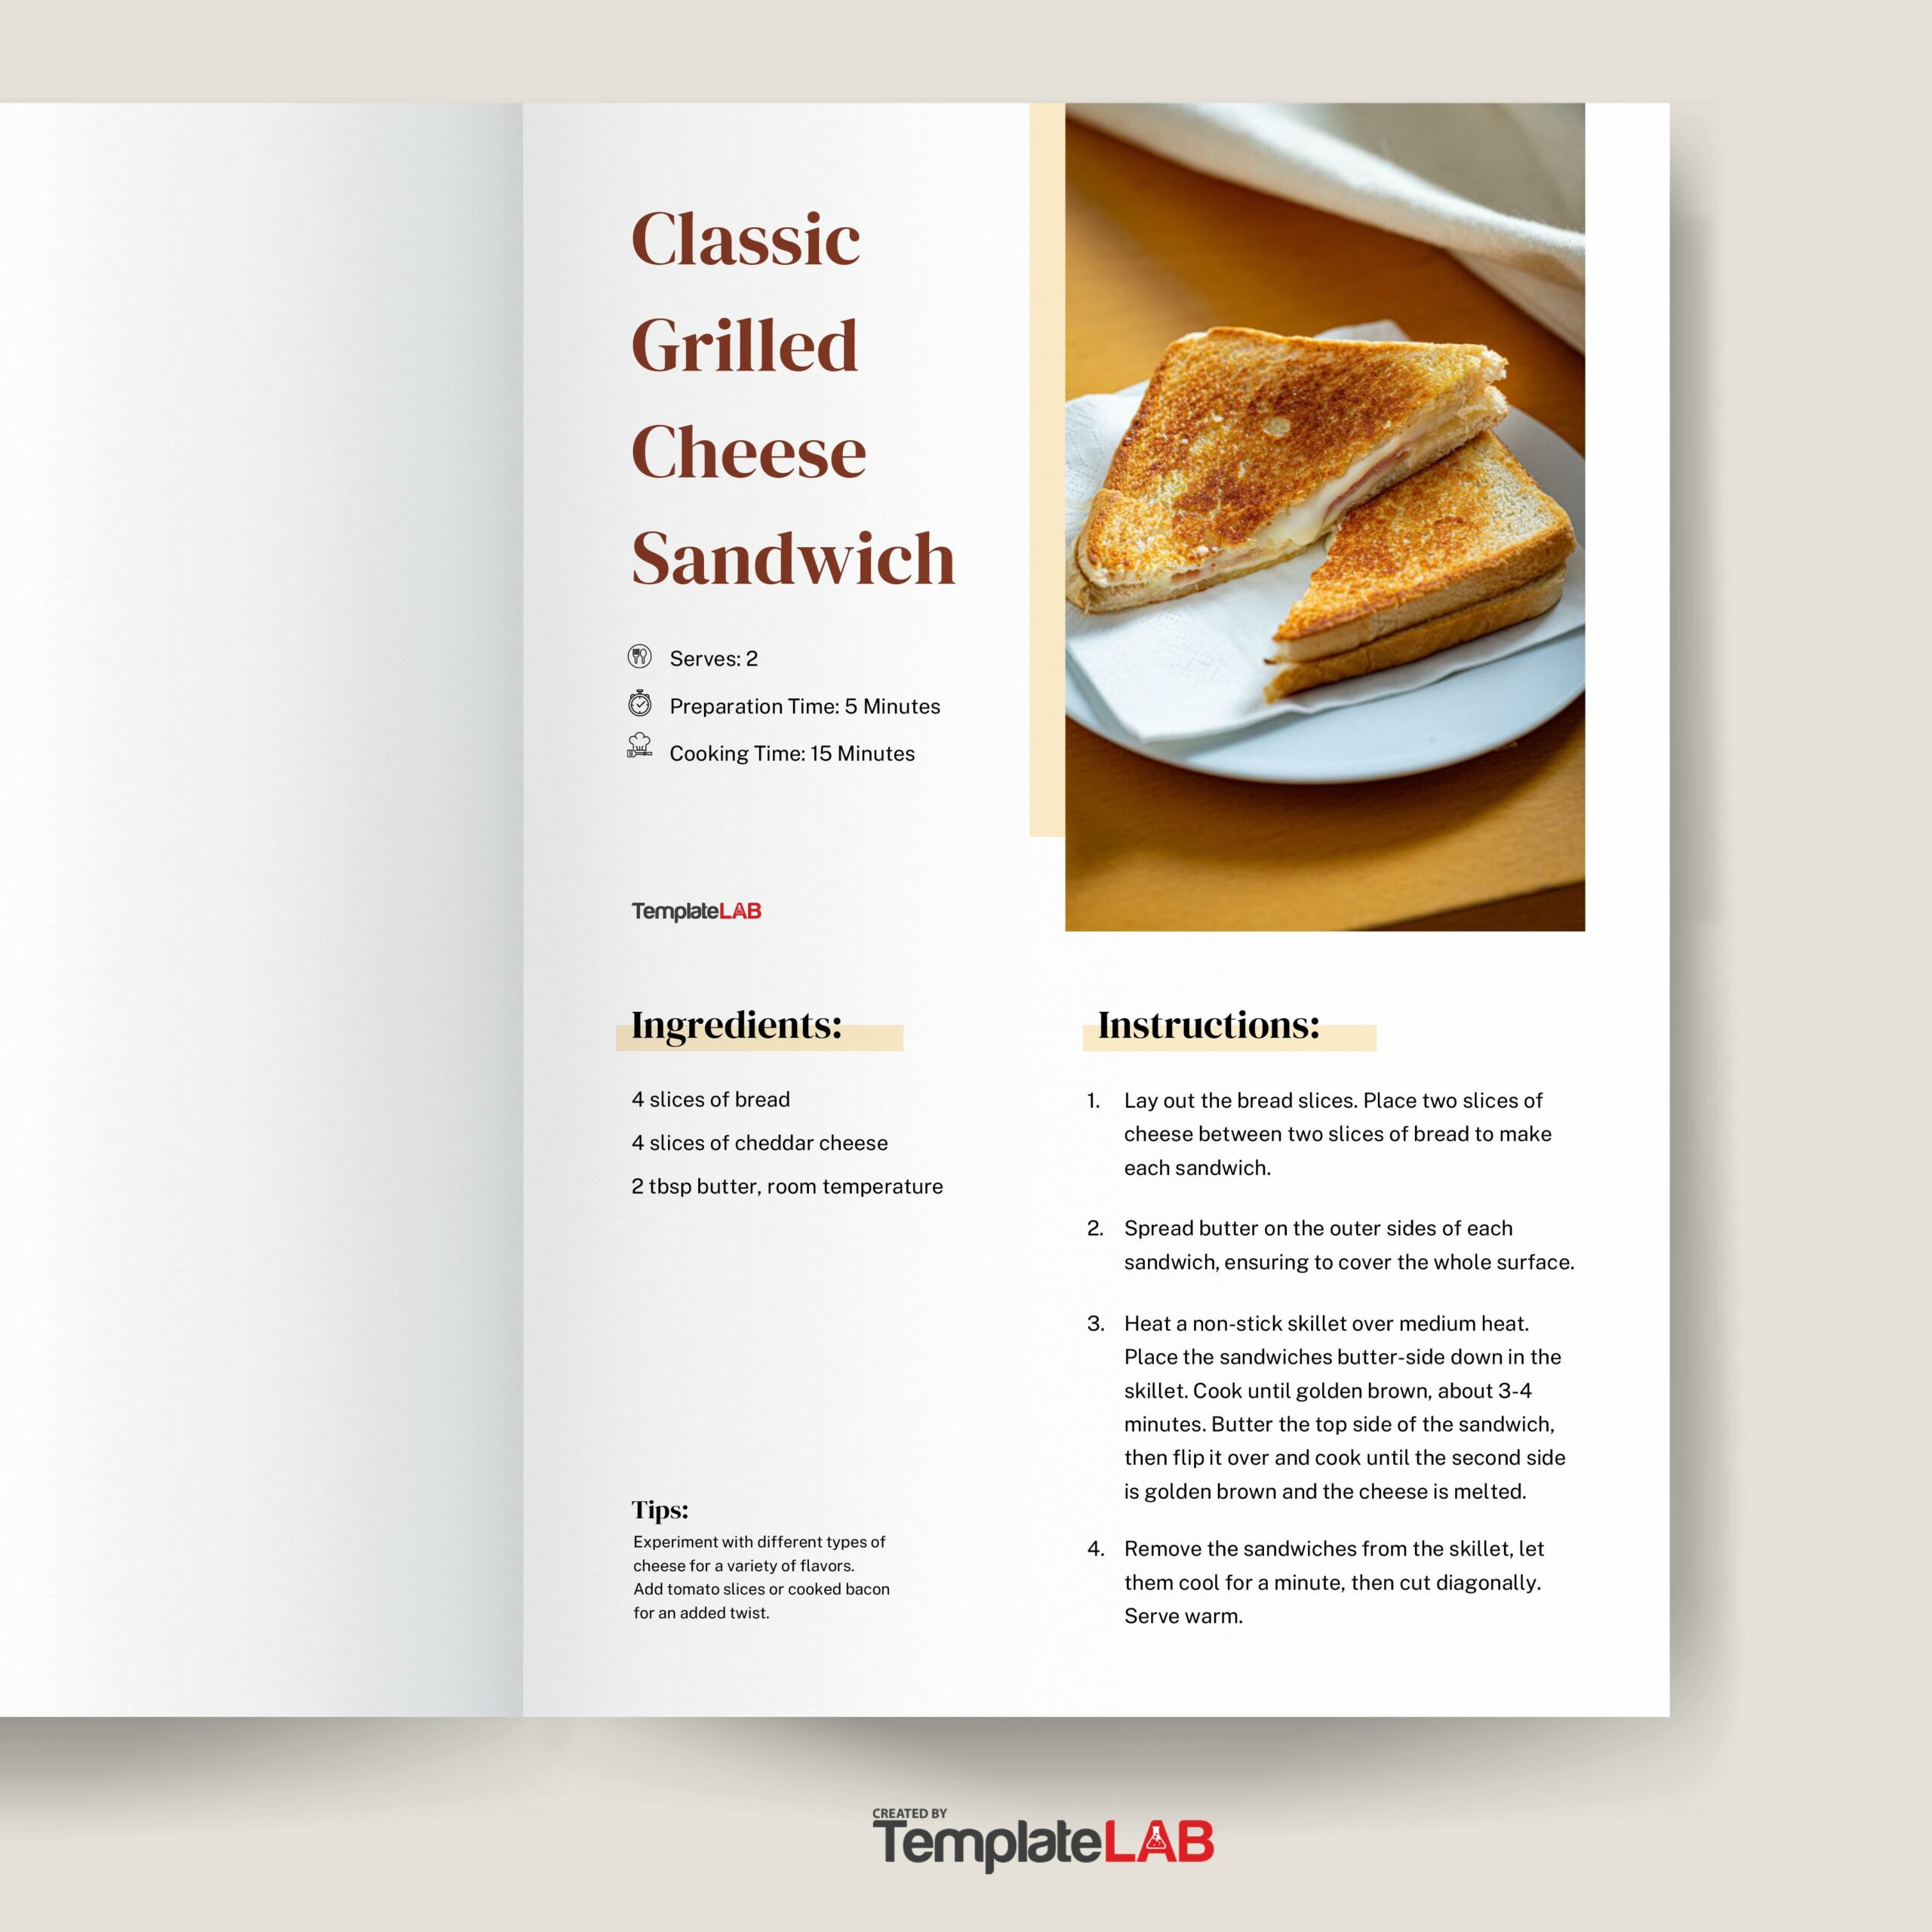 How to Create a Cookbook Template in Microsoft Word